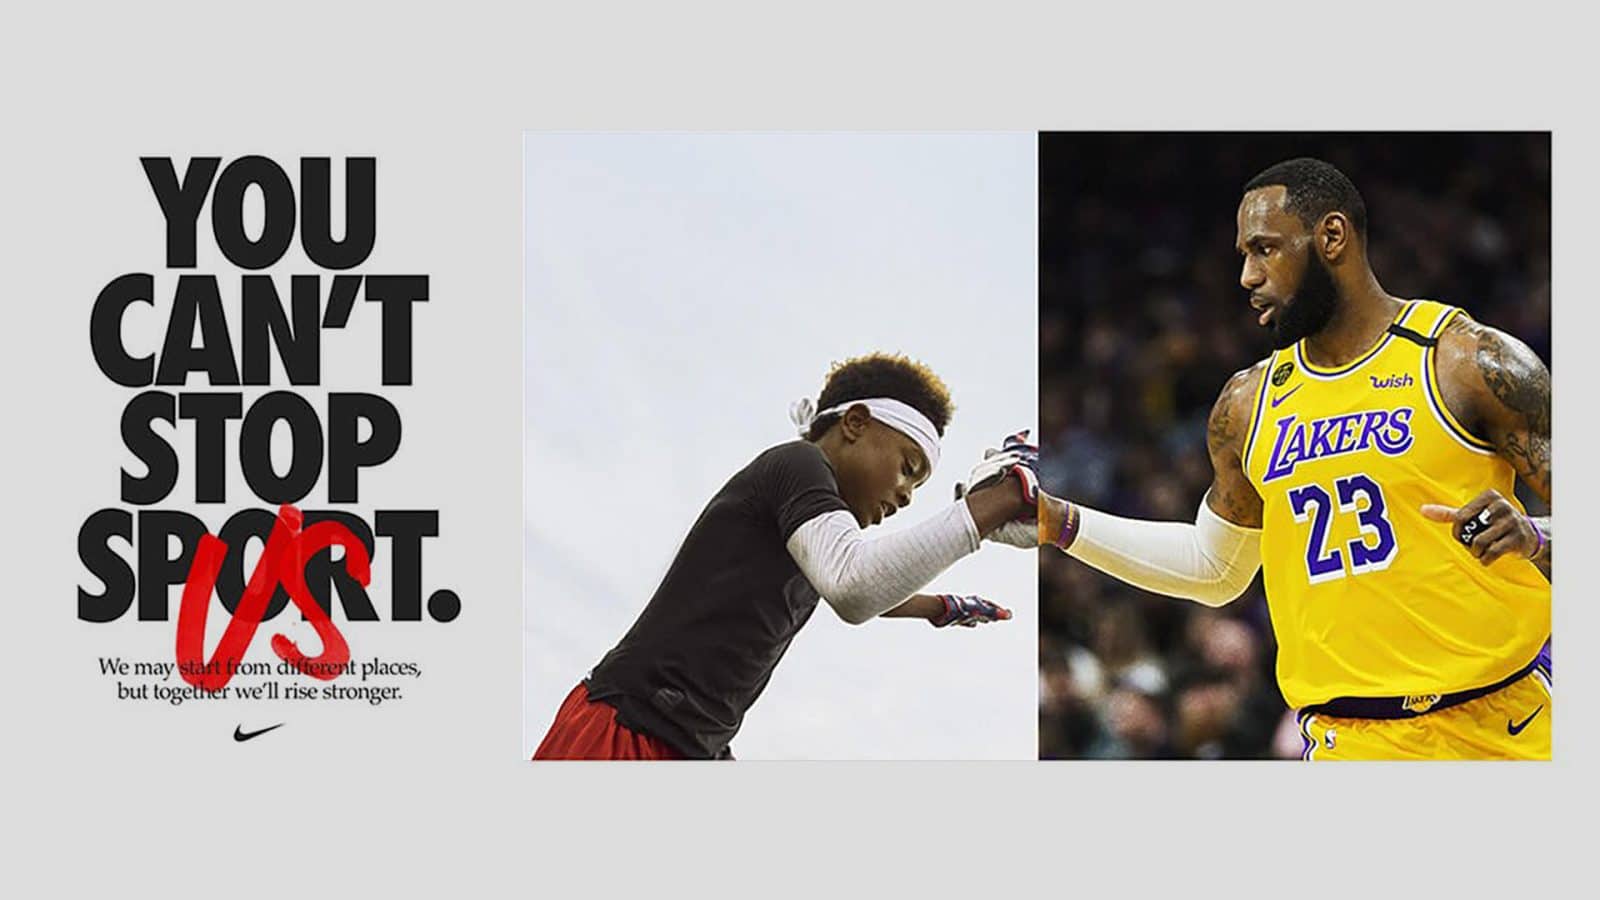 Nike’s ‘You Can’t Stop Us’ Campaign Goes Viral